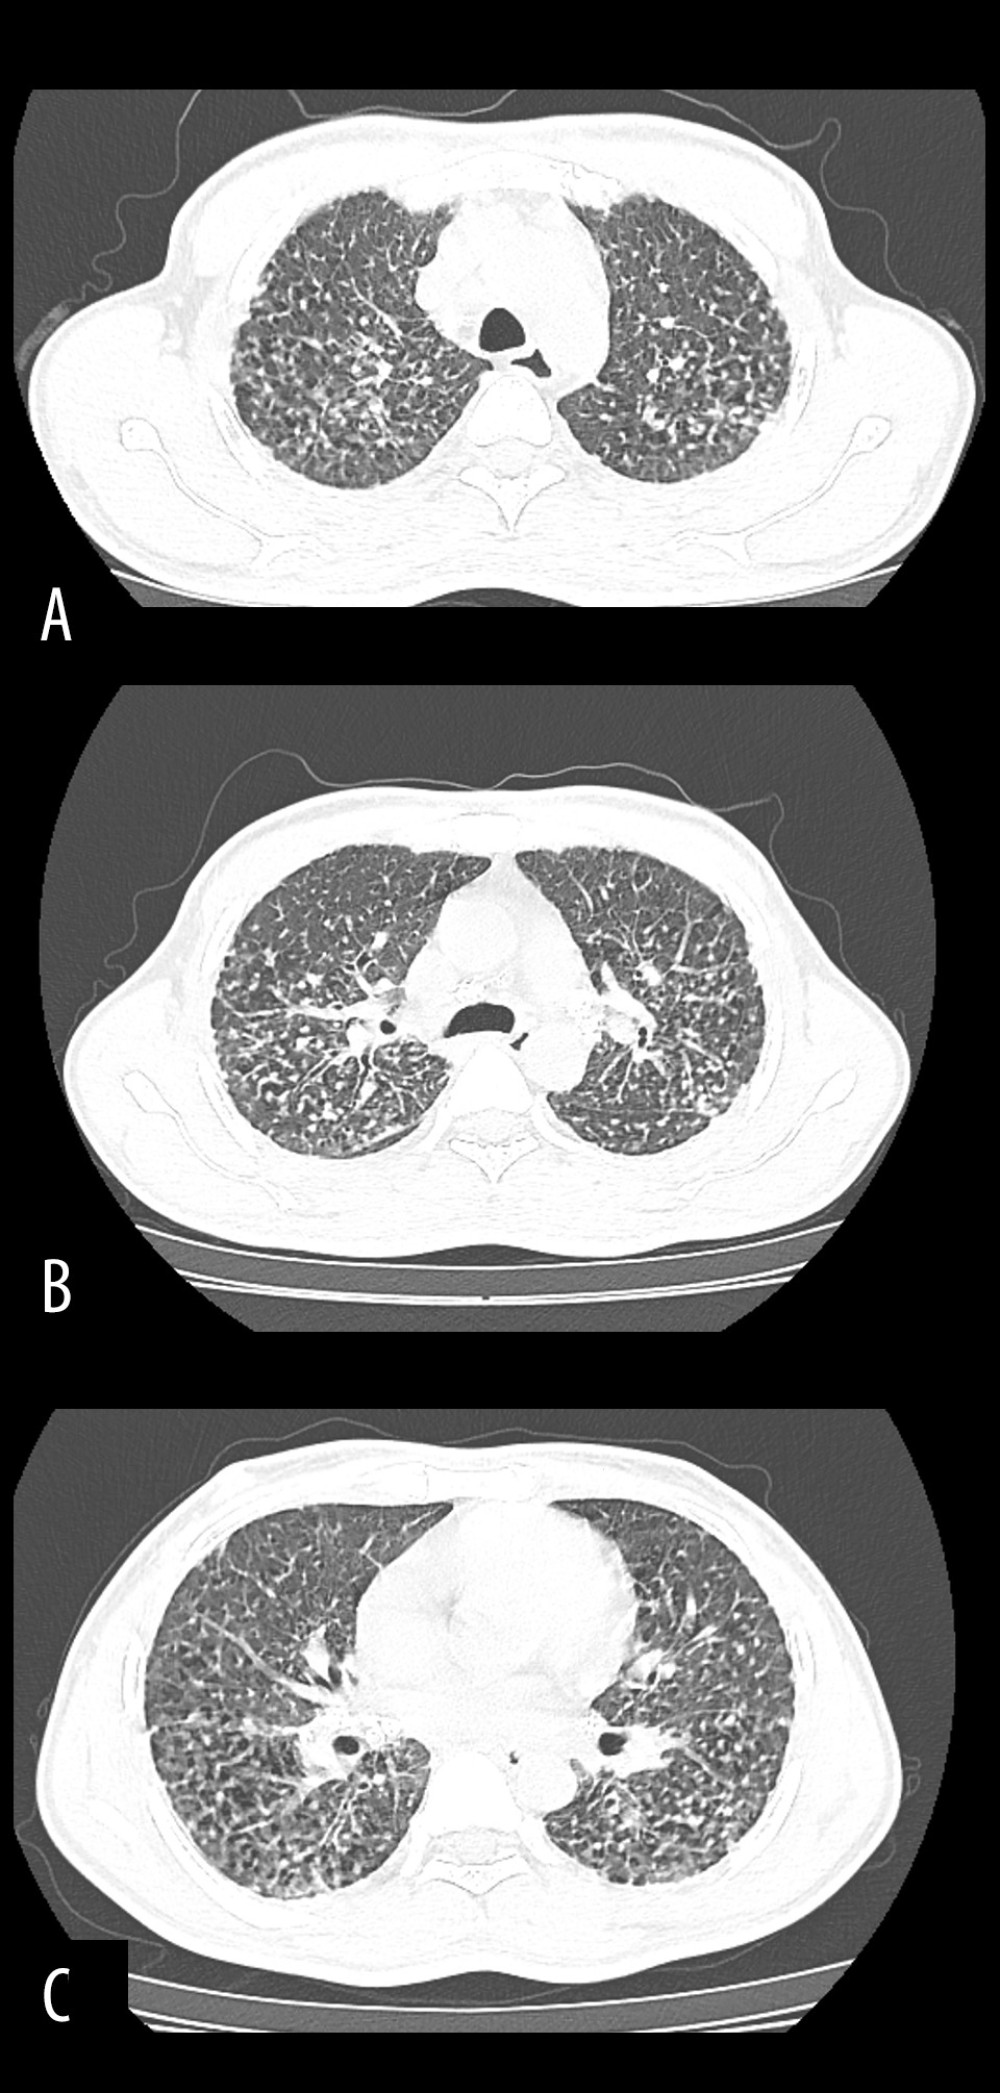 Axial CT (lung window) images at the level of the trachea (A), carina (B), and bilateral lower lobe bronchi (C) show multiple subcentimeter nodules, predominantly in the upper lobes and posterior portions of the lungs, characteristic of silicosis.